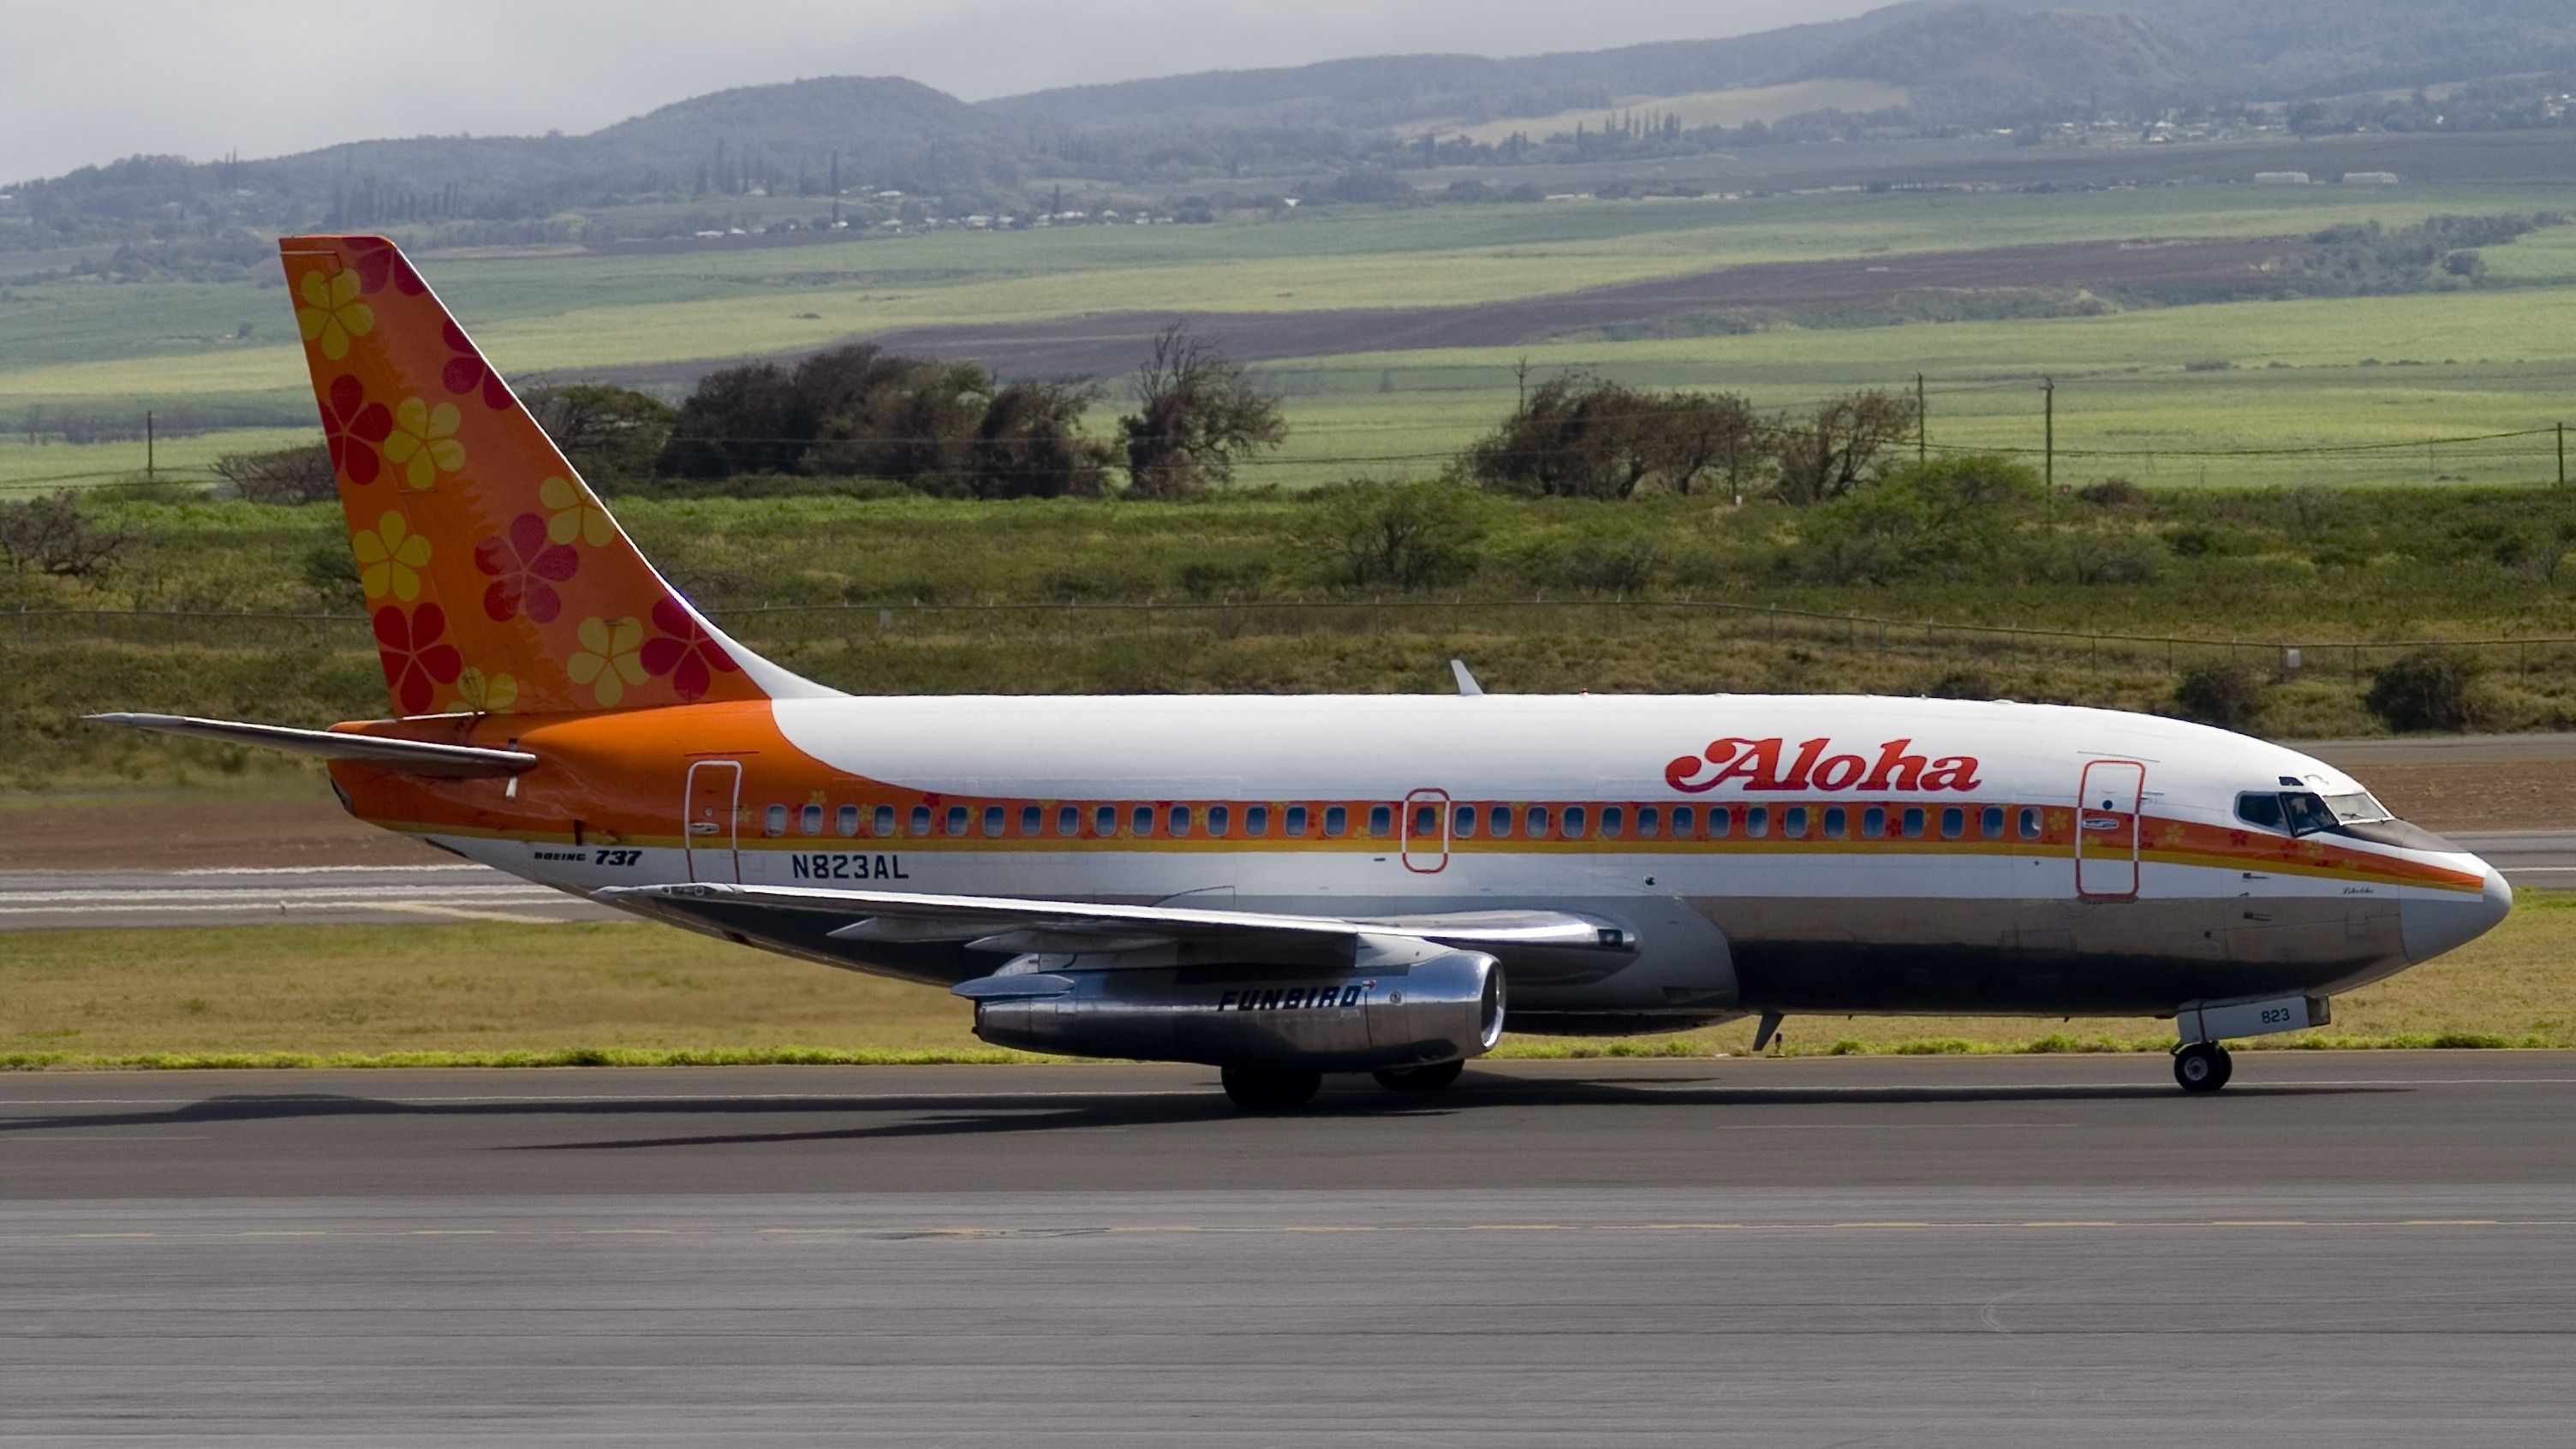 An Aloha Airlines aircraft on a taxiway.